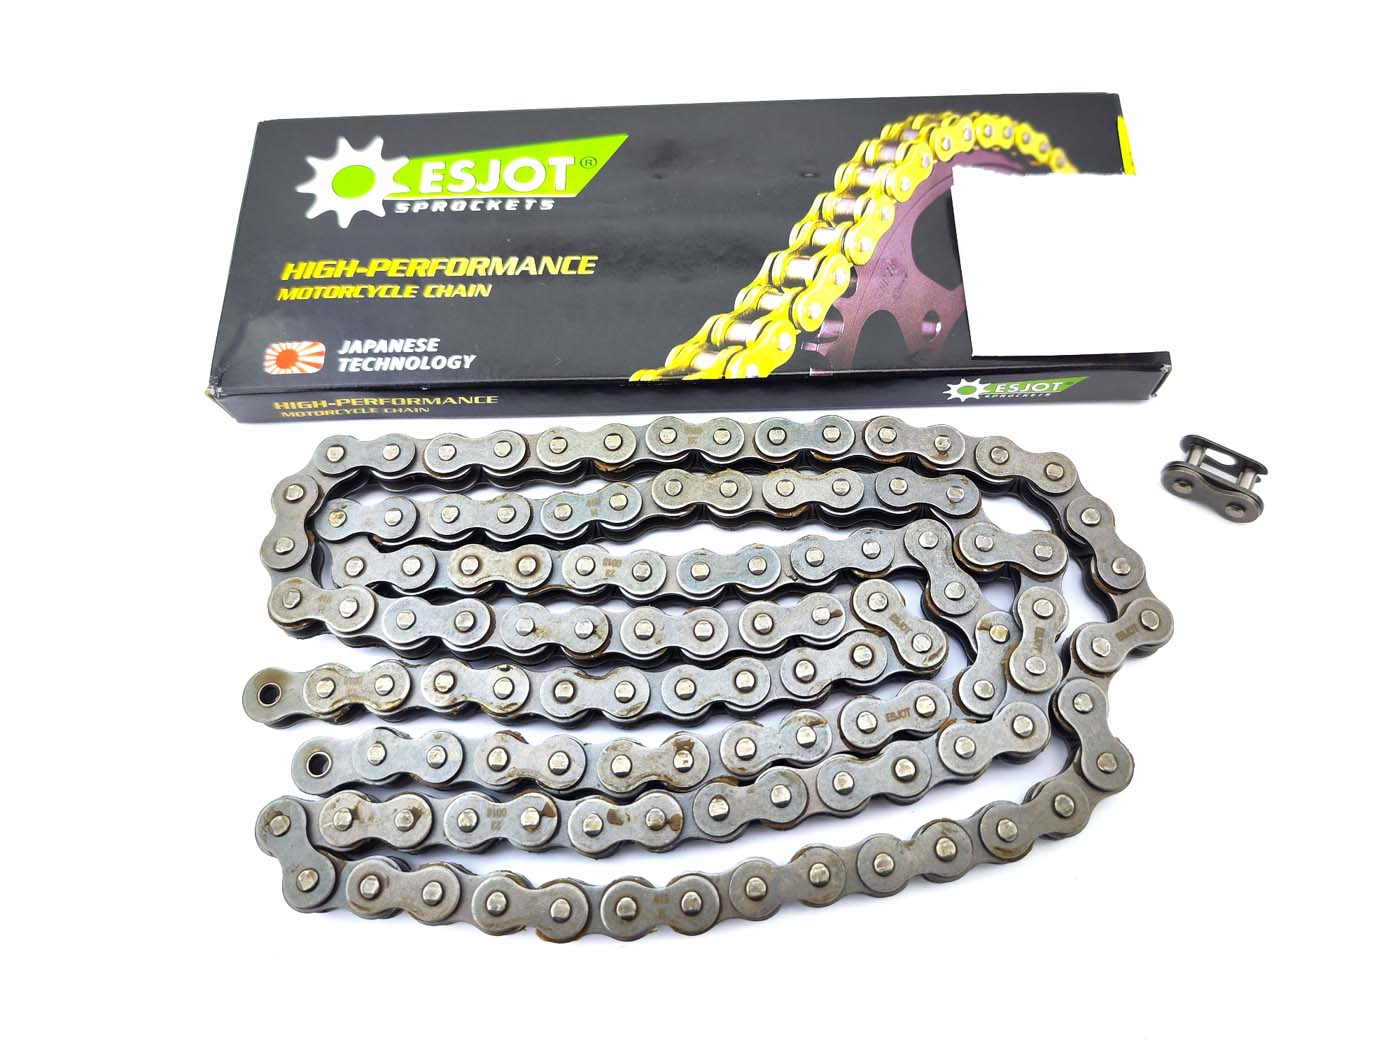 Chain Esjot 428 H X 116 Links Reinforced For Motorcycle Moped